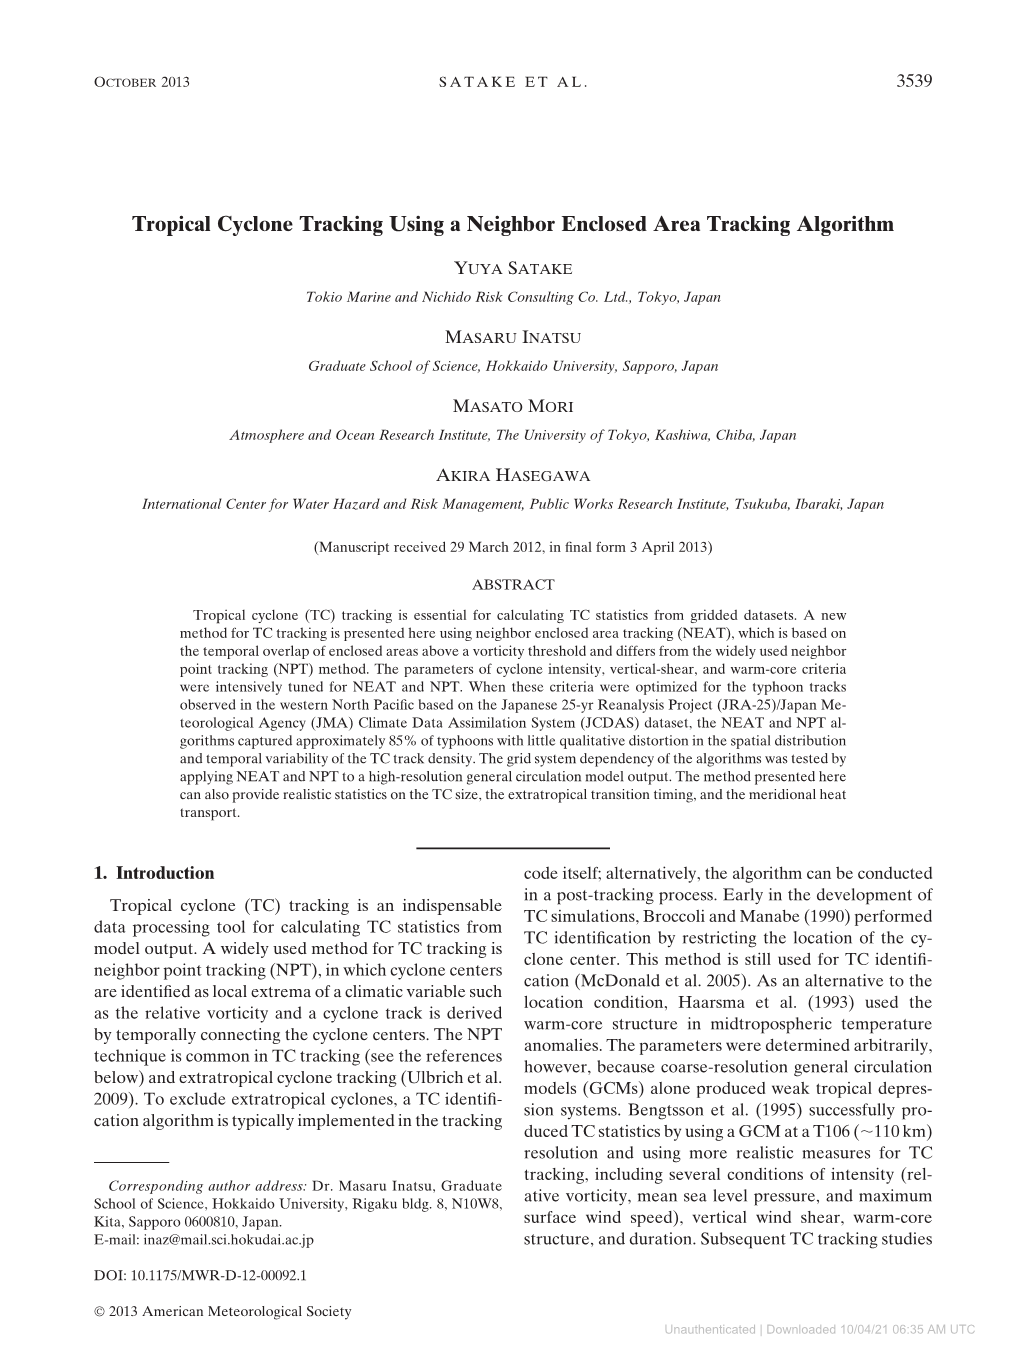 Tropical Cyclone Tracking Using a Neighbor Enclosed Area Tracking Algorithm